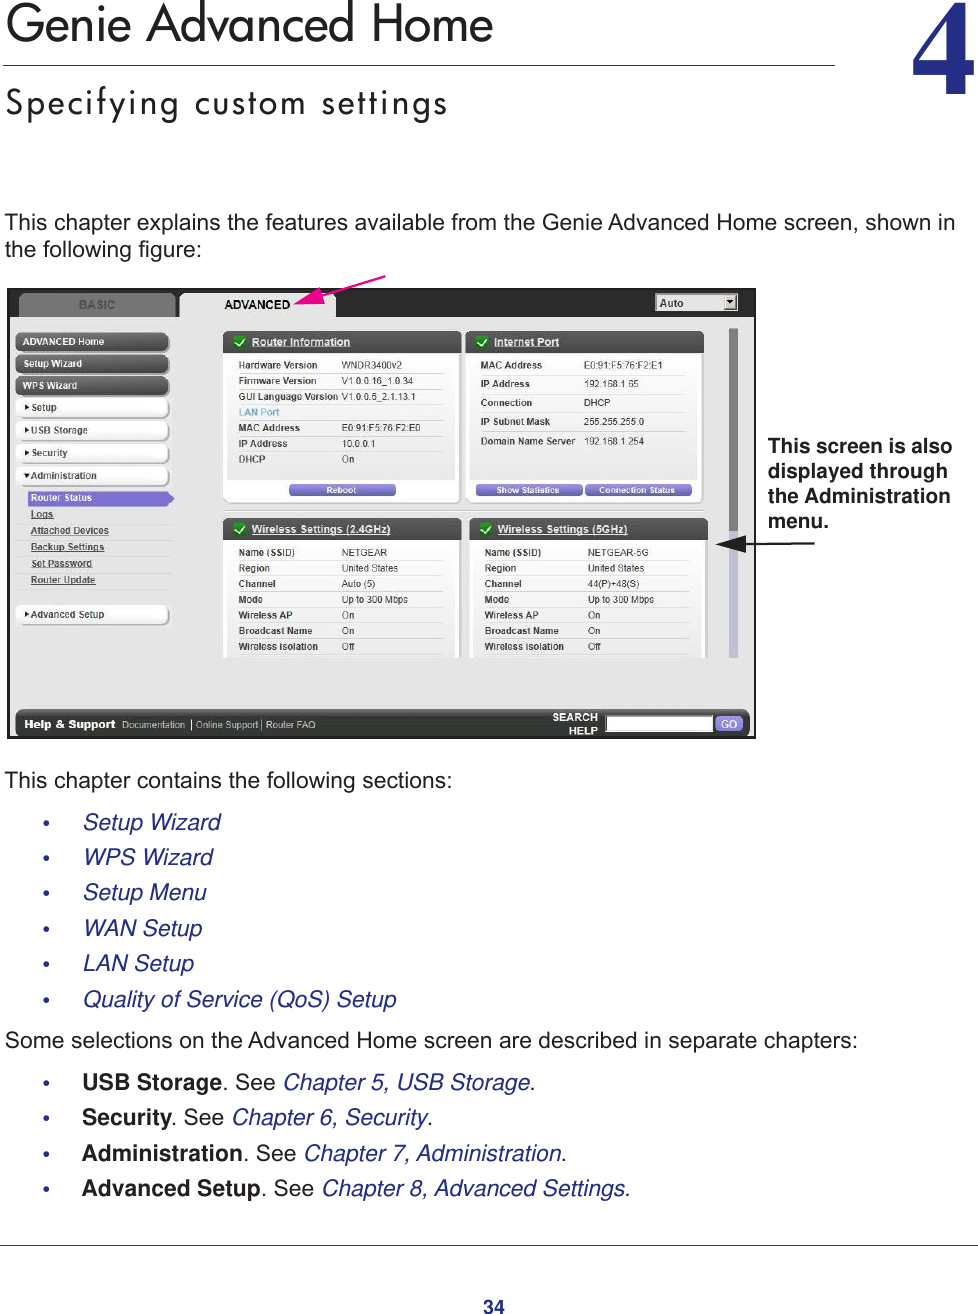 3444.   Genie Advanced HomeSpecifying custom settingsThis chapter explains the features available from the Genie Advanced Home screen, shown in the following figure:This screen is also displayed through the Administration menu.This chapter contains the following sections:•     Setup Wizard •     WPS Wizard •     Setup Menu •     WAN Setup •     LAN Setup •     Quality of Service (QoS) Setup Some selections on the Advanced Home screen are described in separate chapters:•     USB Storage. See Chapter 5, USB Storage.•     Security. See Chapter 6, Security.•     Administration. See Chapter 7, Administration.•     Advanced Setup. See Chapter 8, Advanced Settings.